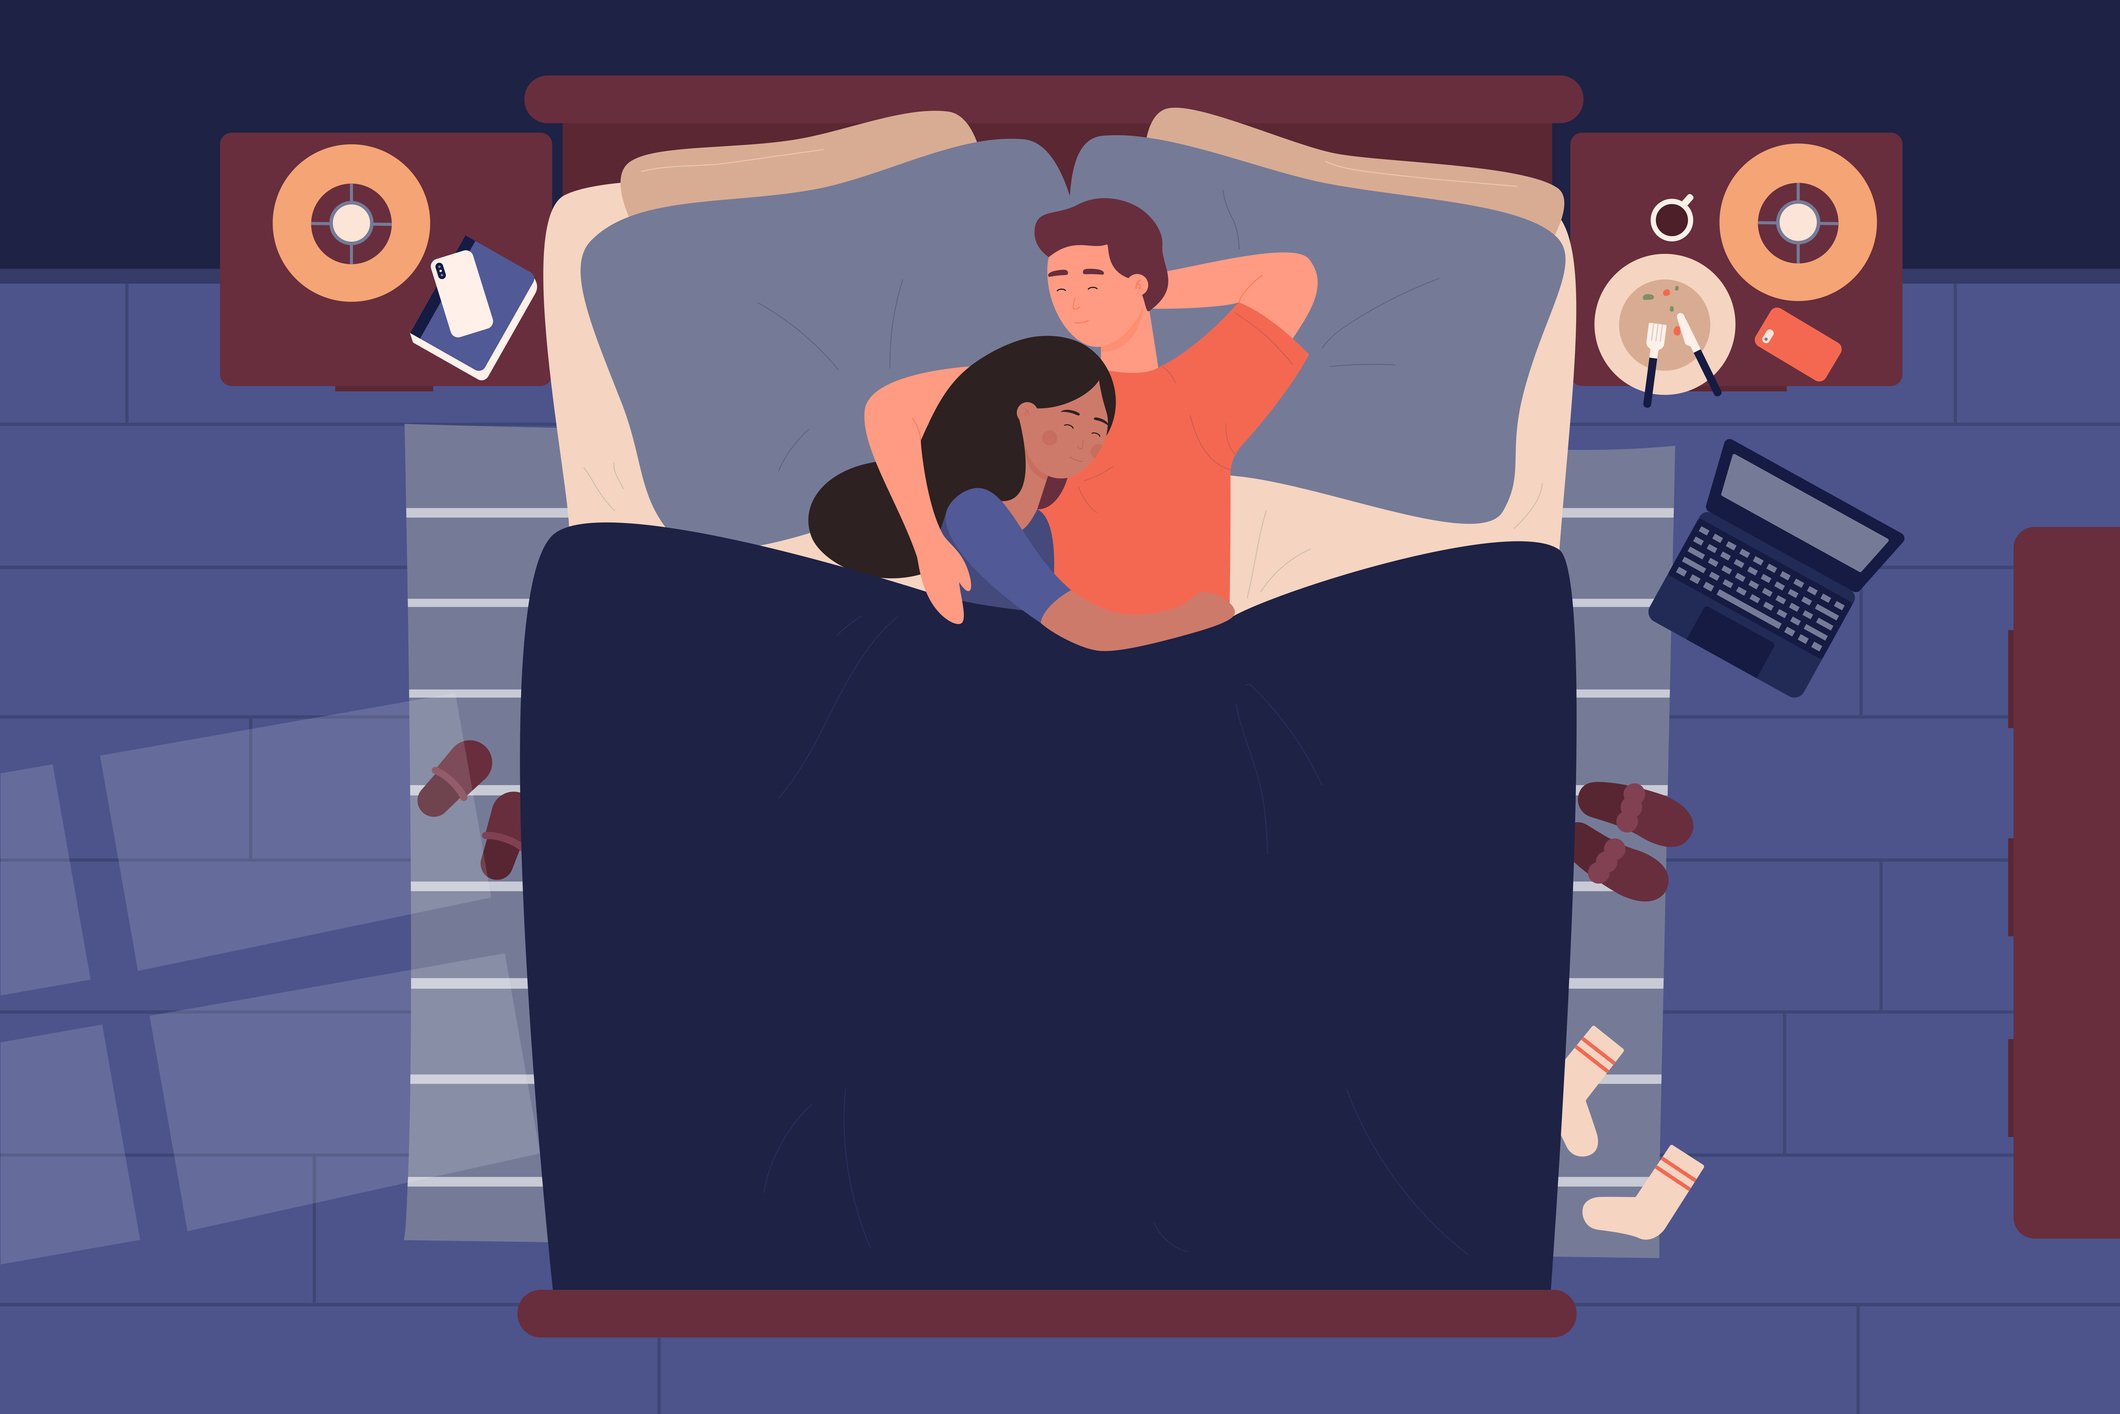 Man and woman in bed at night. 